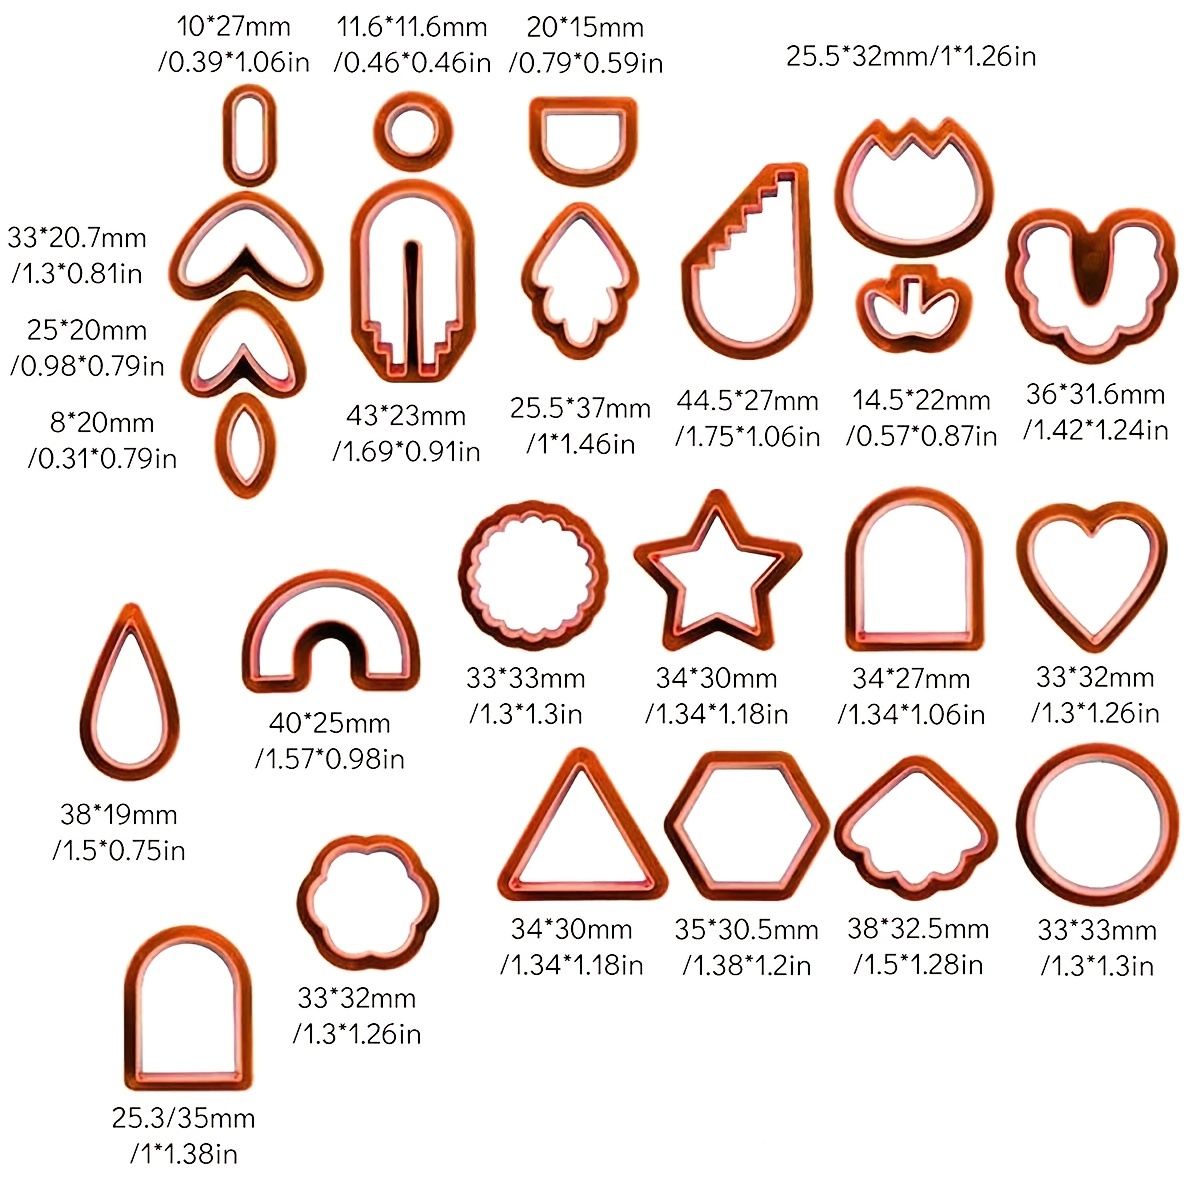 Urvrriu 129pcs DIY Clay Earring Cutters Set for Polymer Clay Jewelry Making Geometric Shapes Polymer Clay Cutters Set with Earring Hooks and Jump